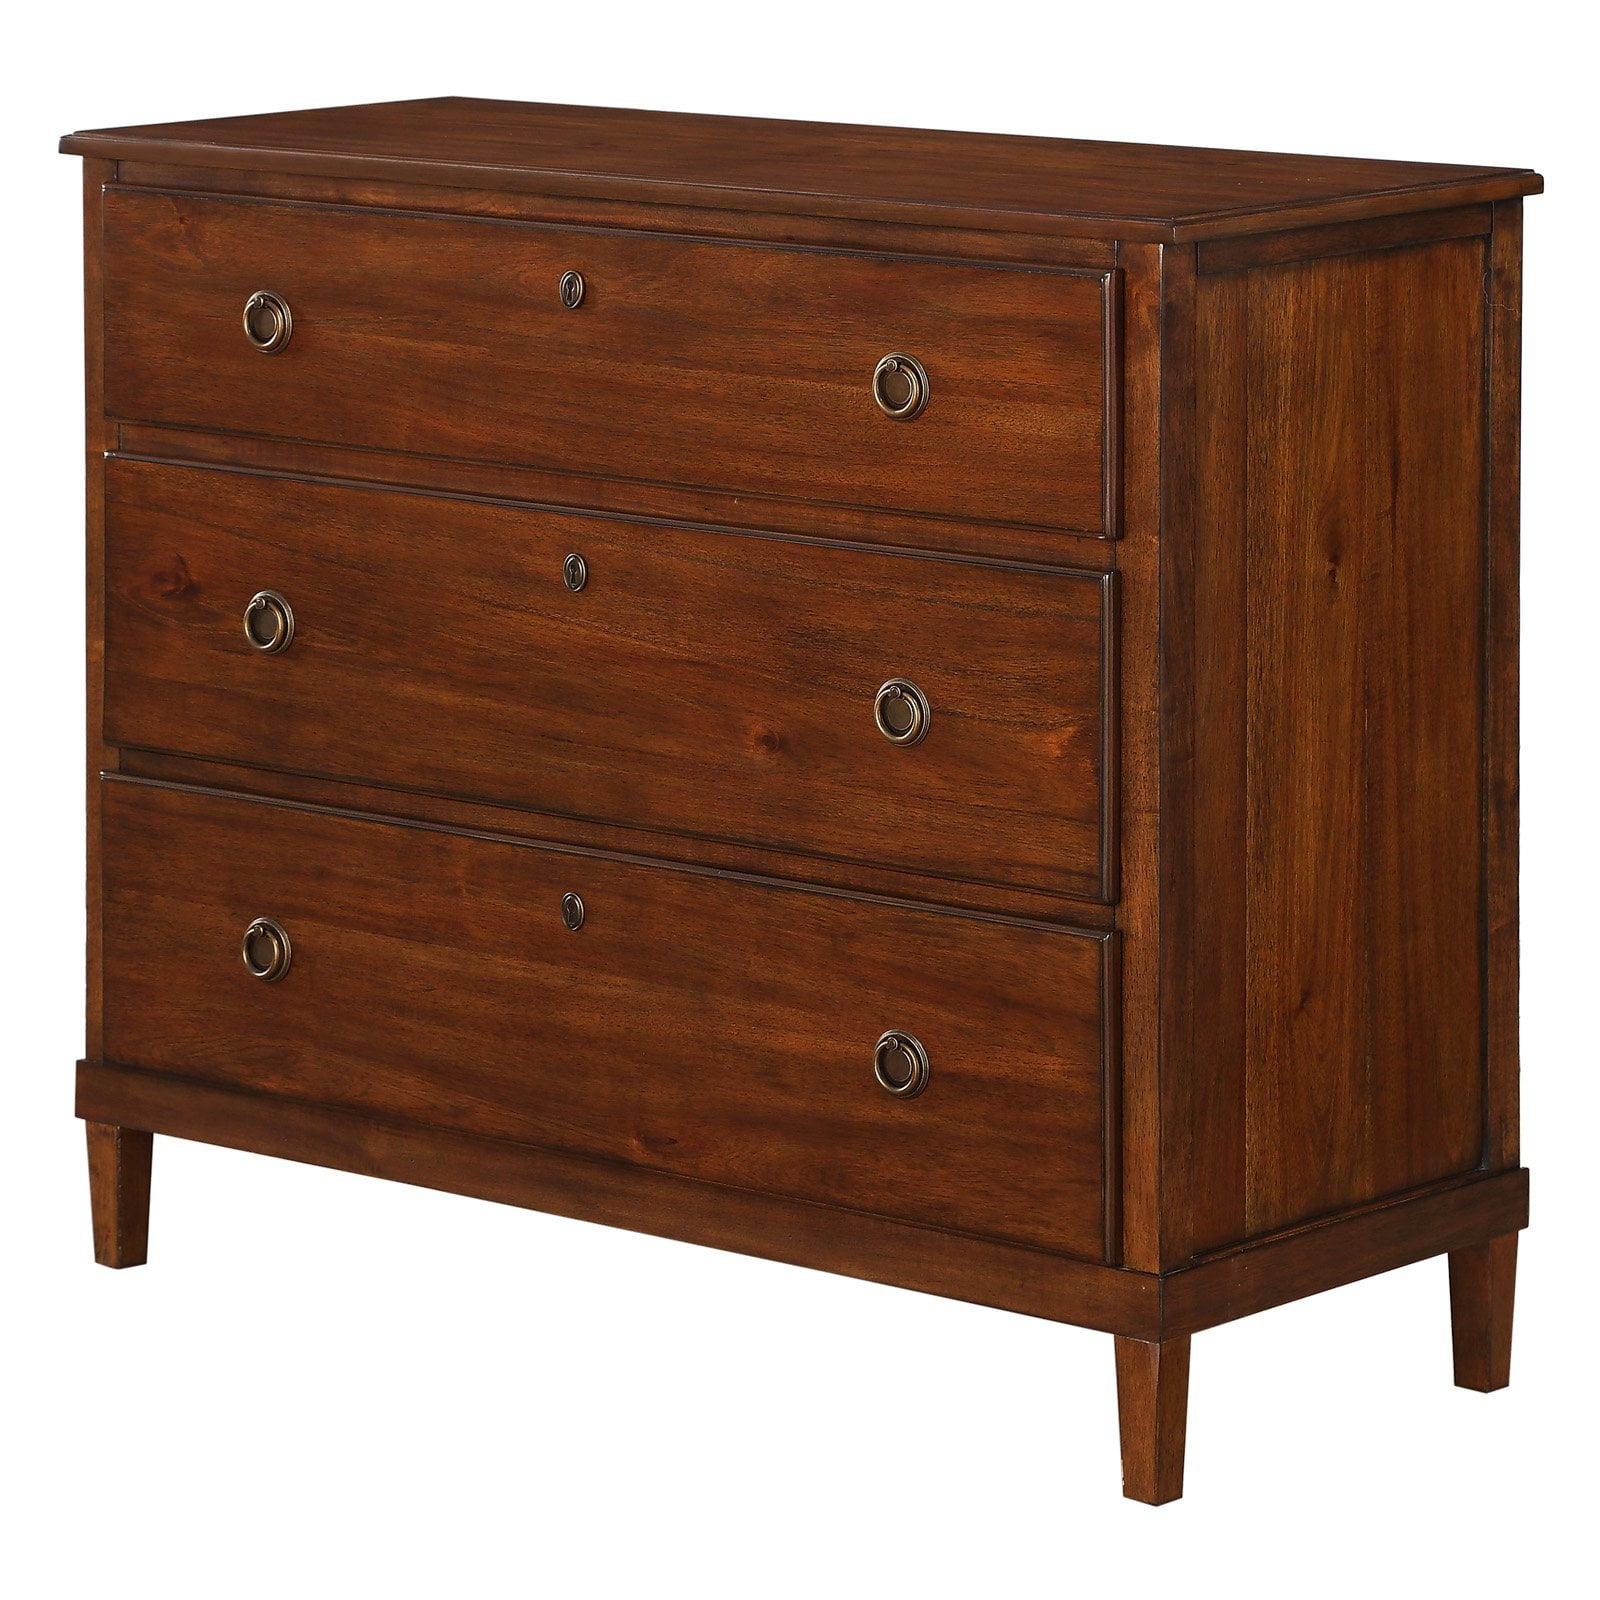 Comfort Pointe Cambridge 3 Drawer Bachelors Chest